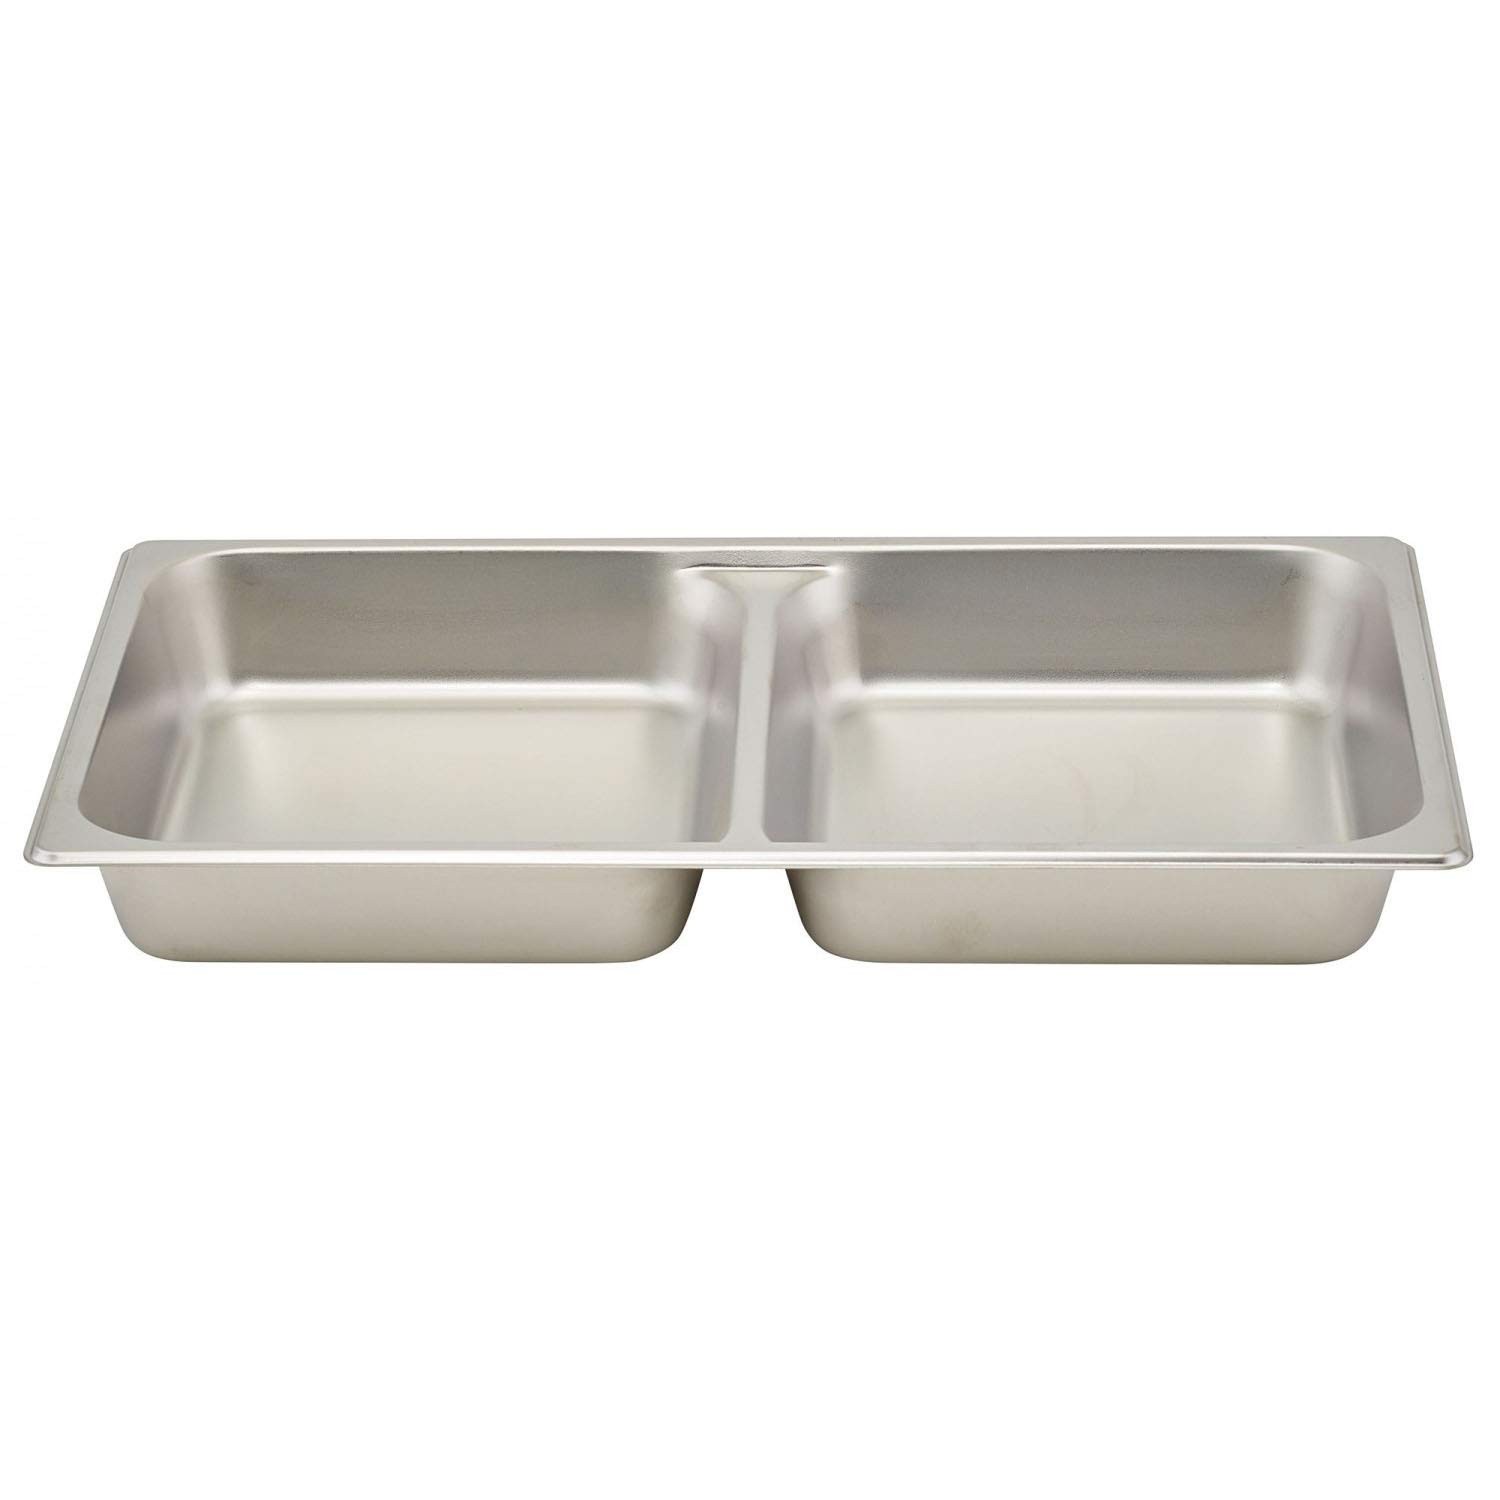 TigerChef Full Size Divided Steam Table Pan, 2-1/2" Deep - 2/Pack